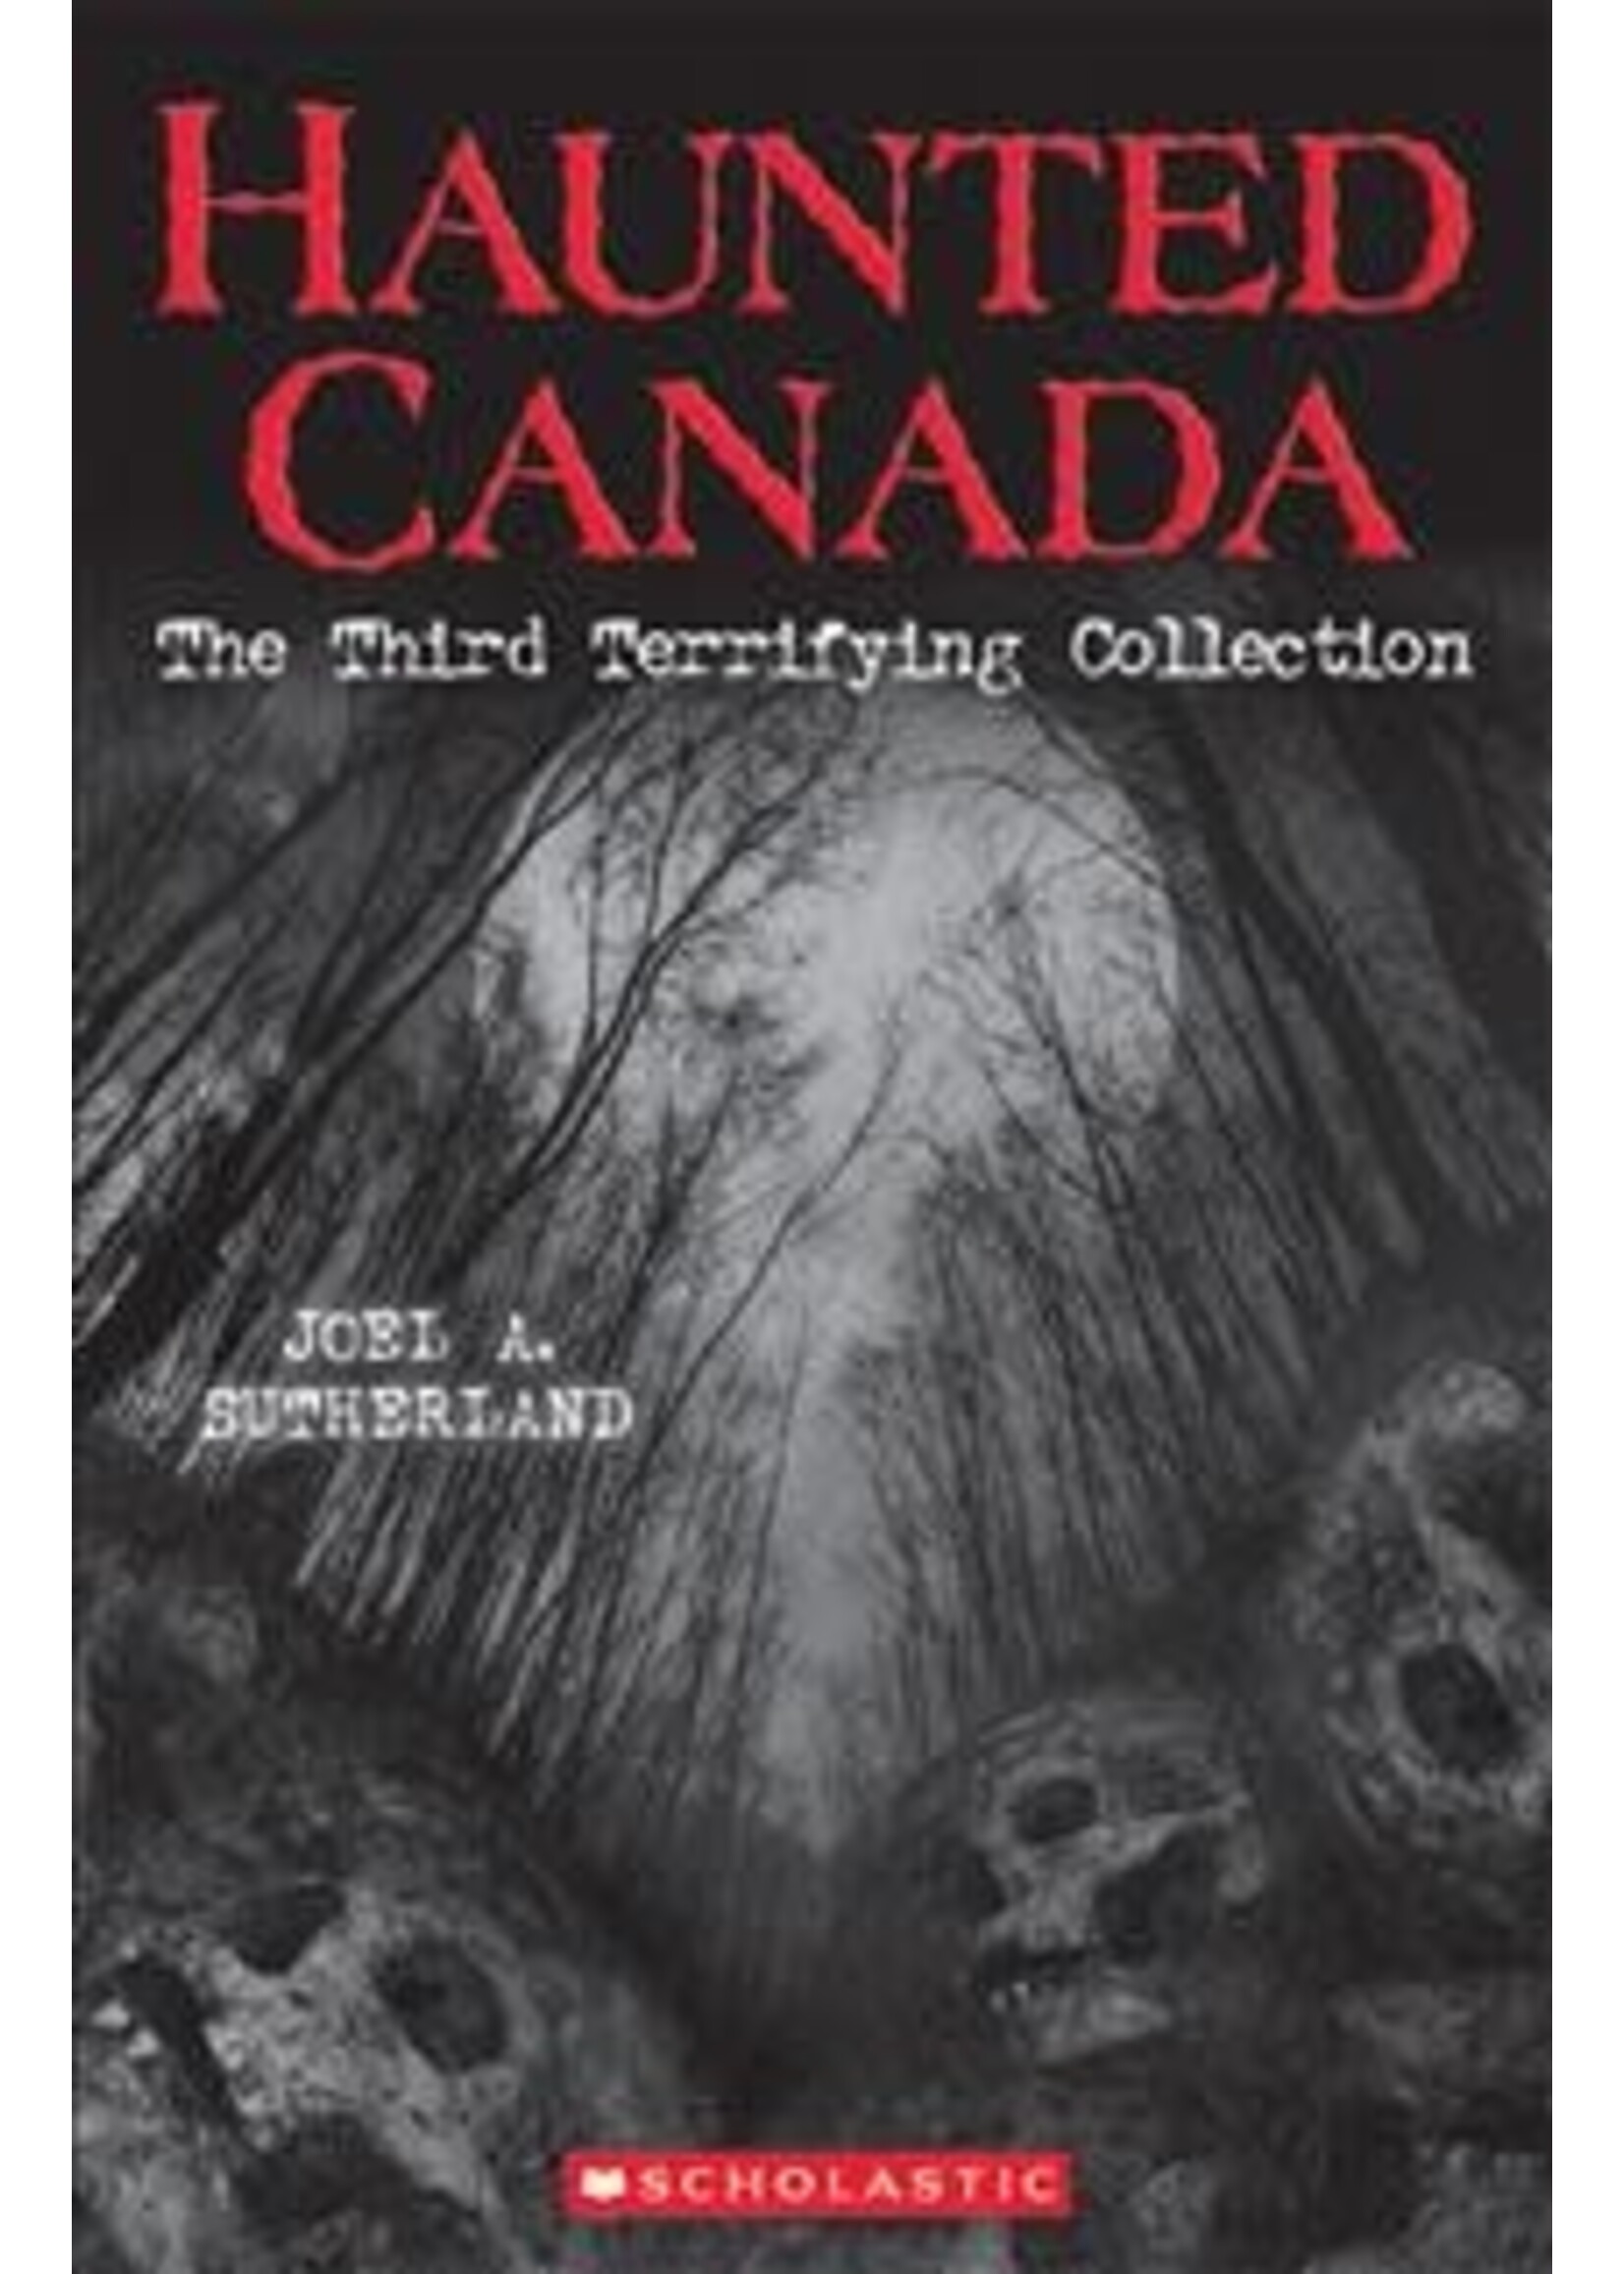 Copy of Haunted Canada: The First Terrifying Collection by Pat Hancock